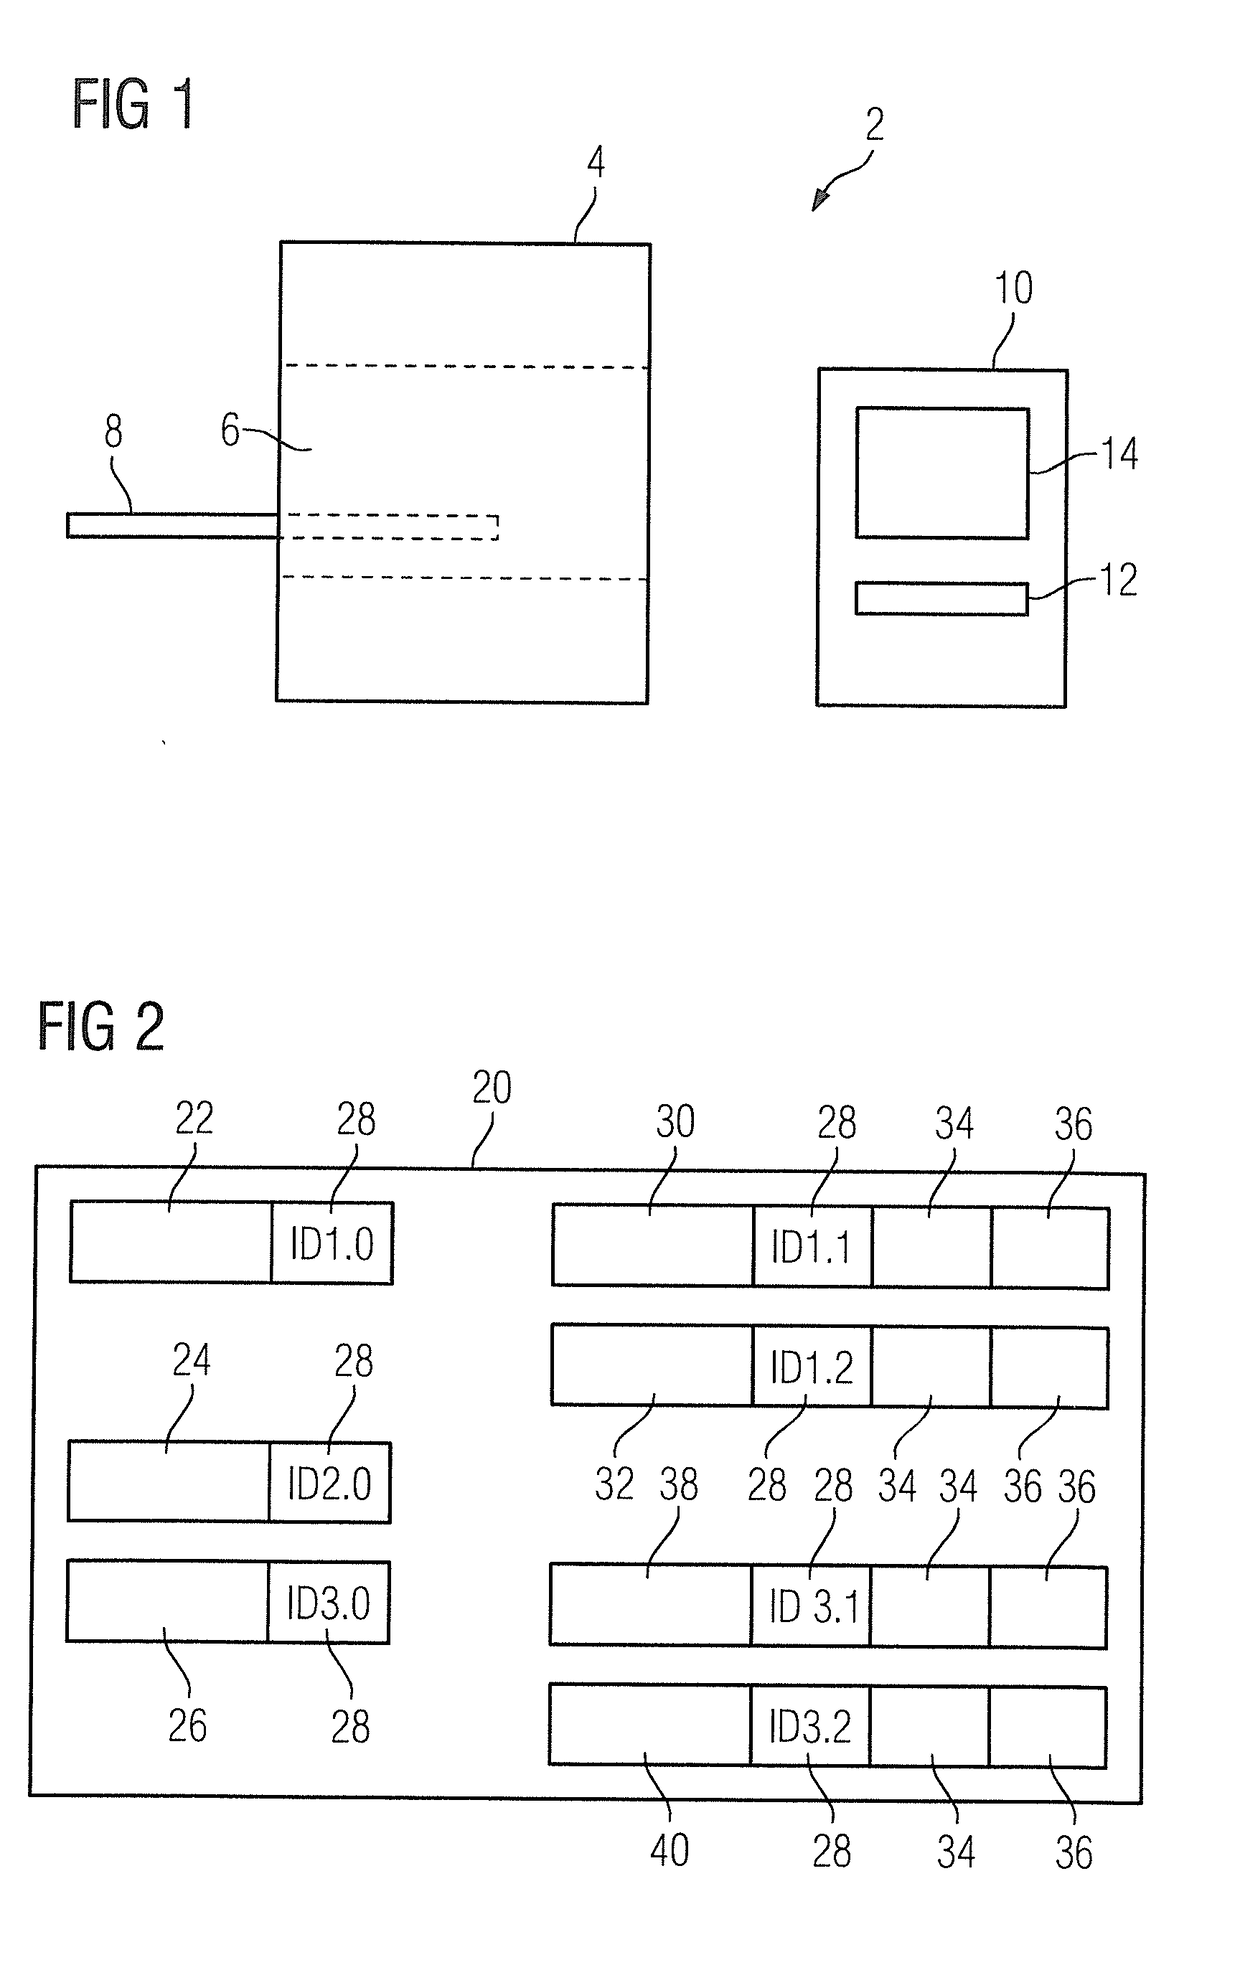 Operating method for a medical imaging apparatus